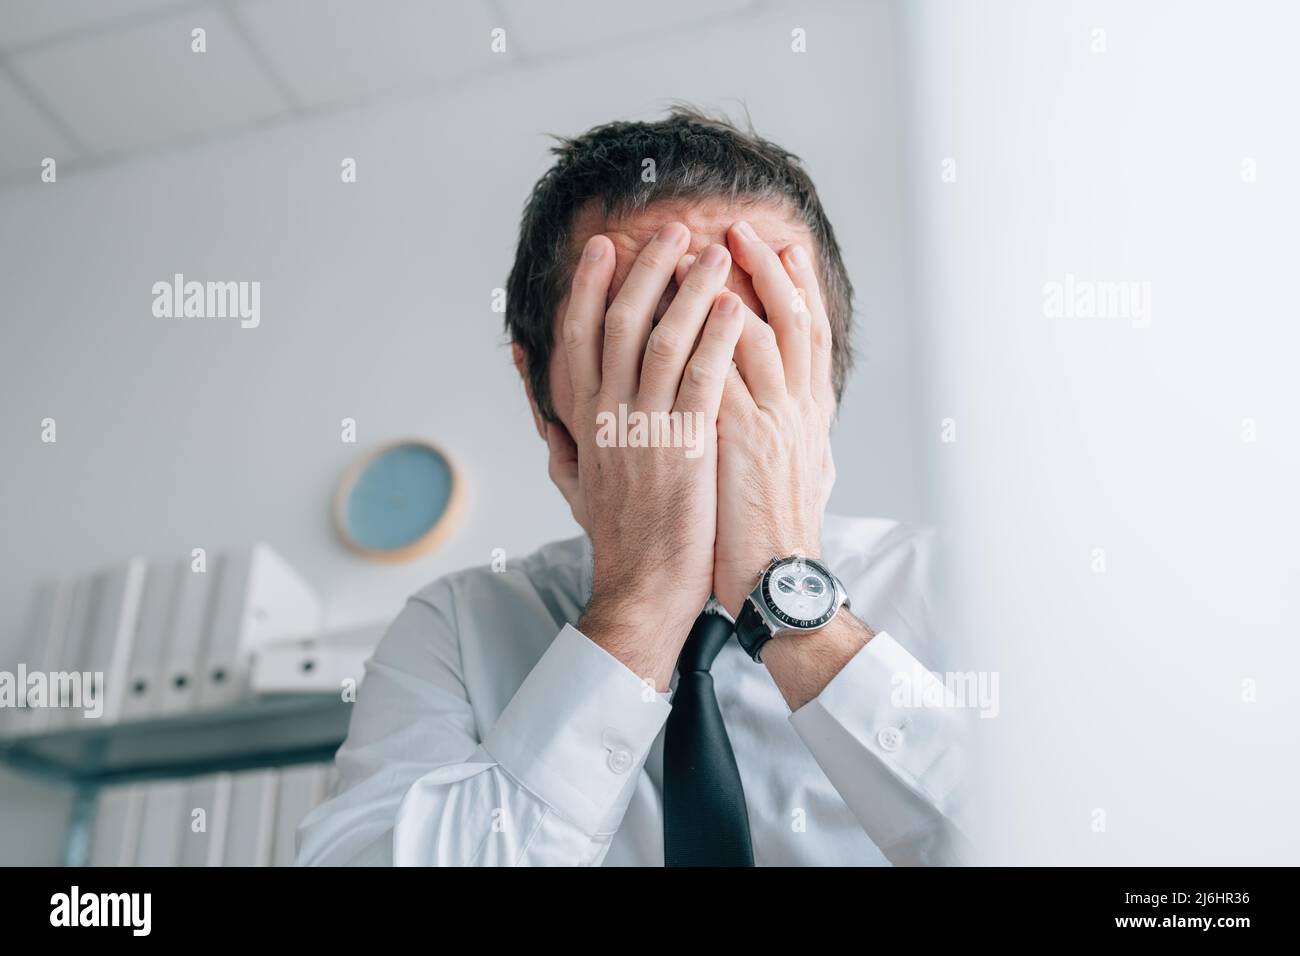 Business failure, businessman covering face with hands and crying in office, selective focus Stock Photo